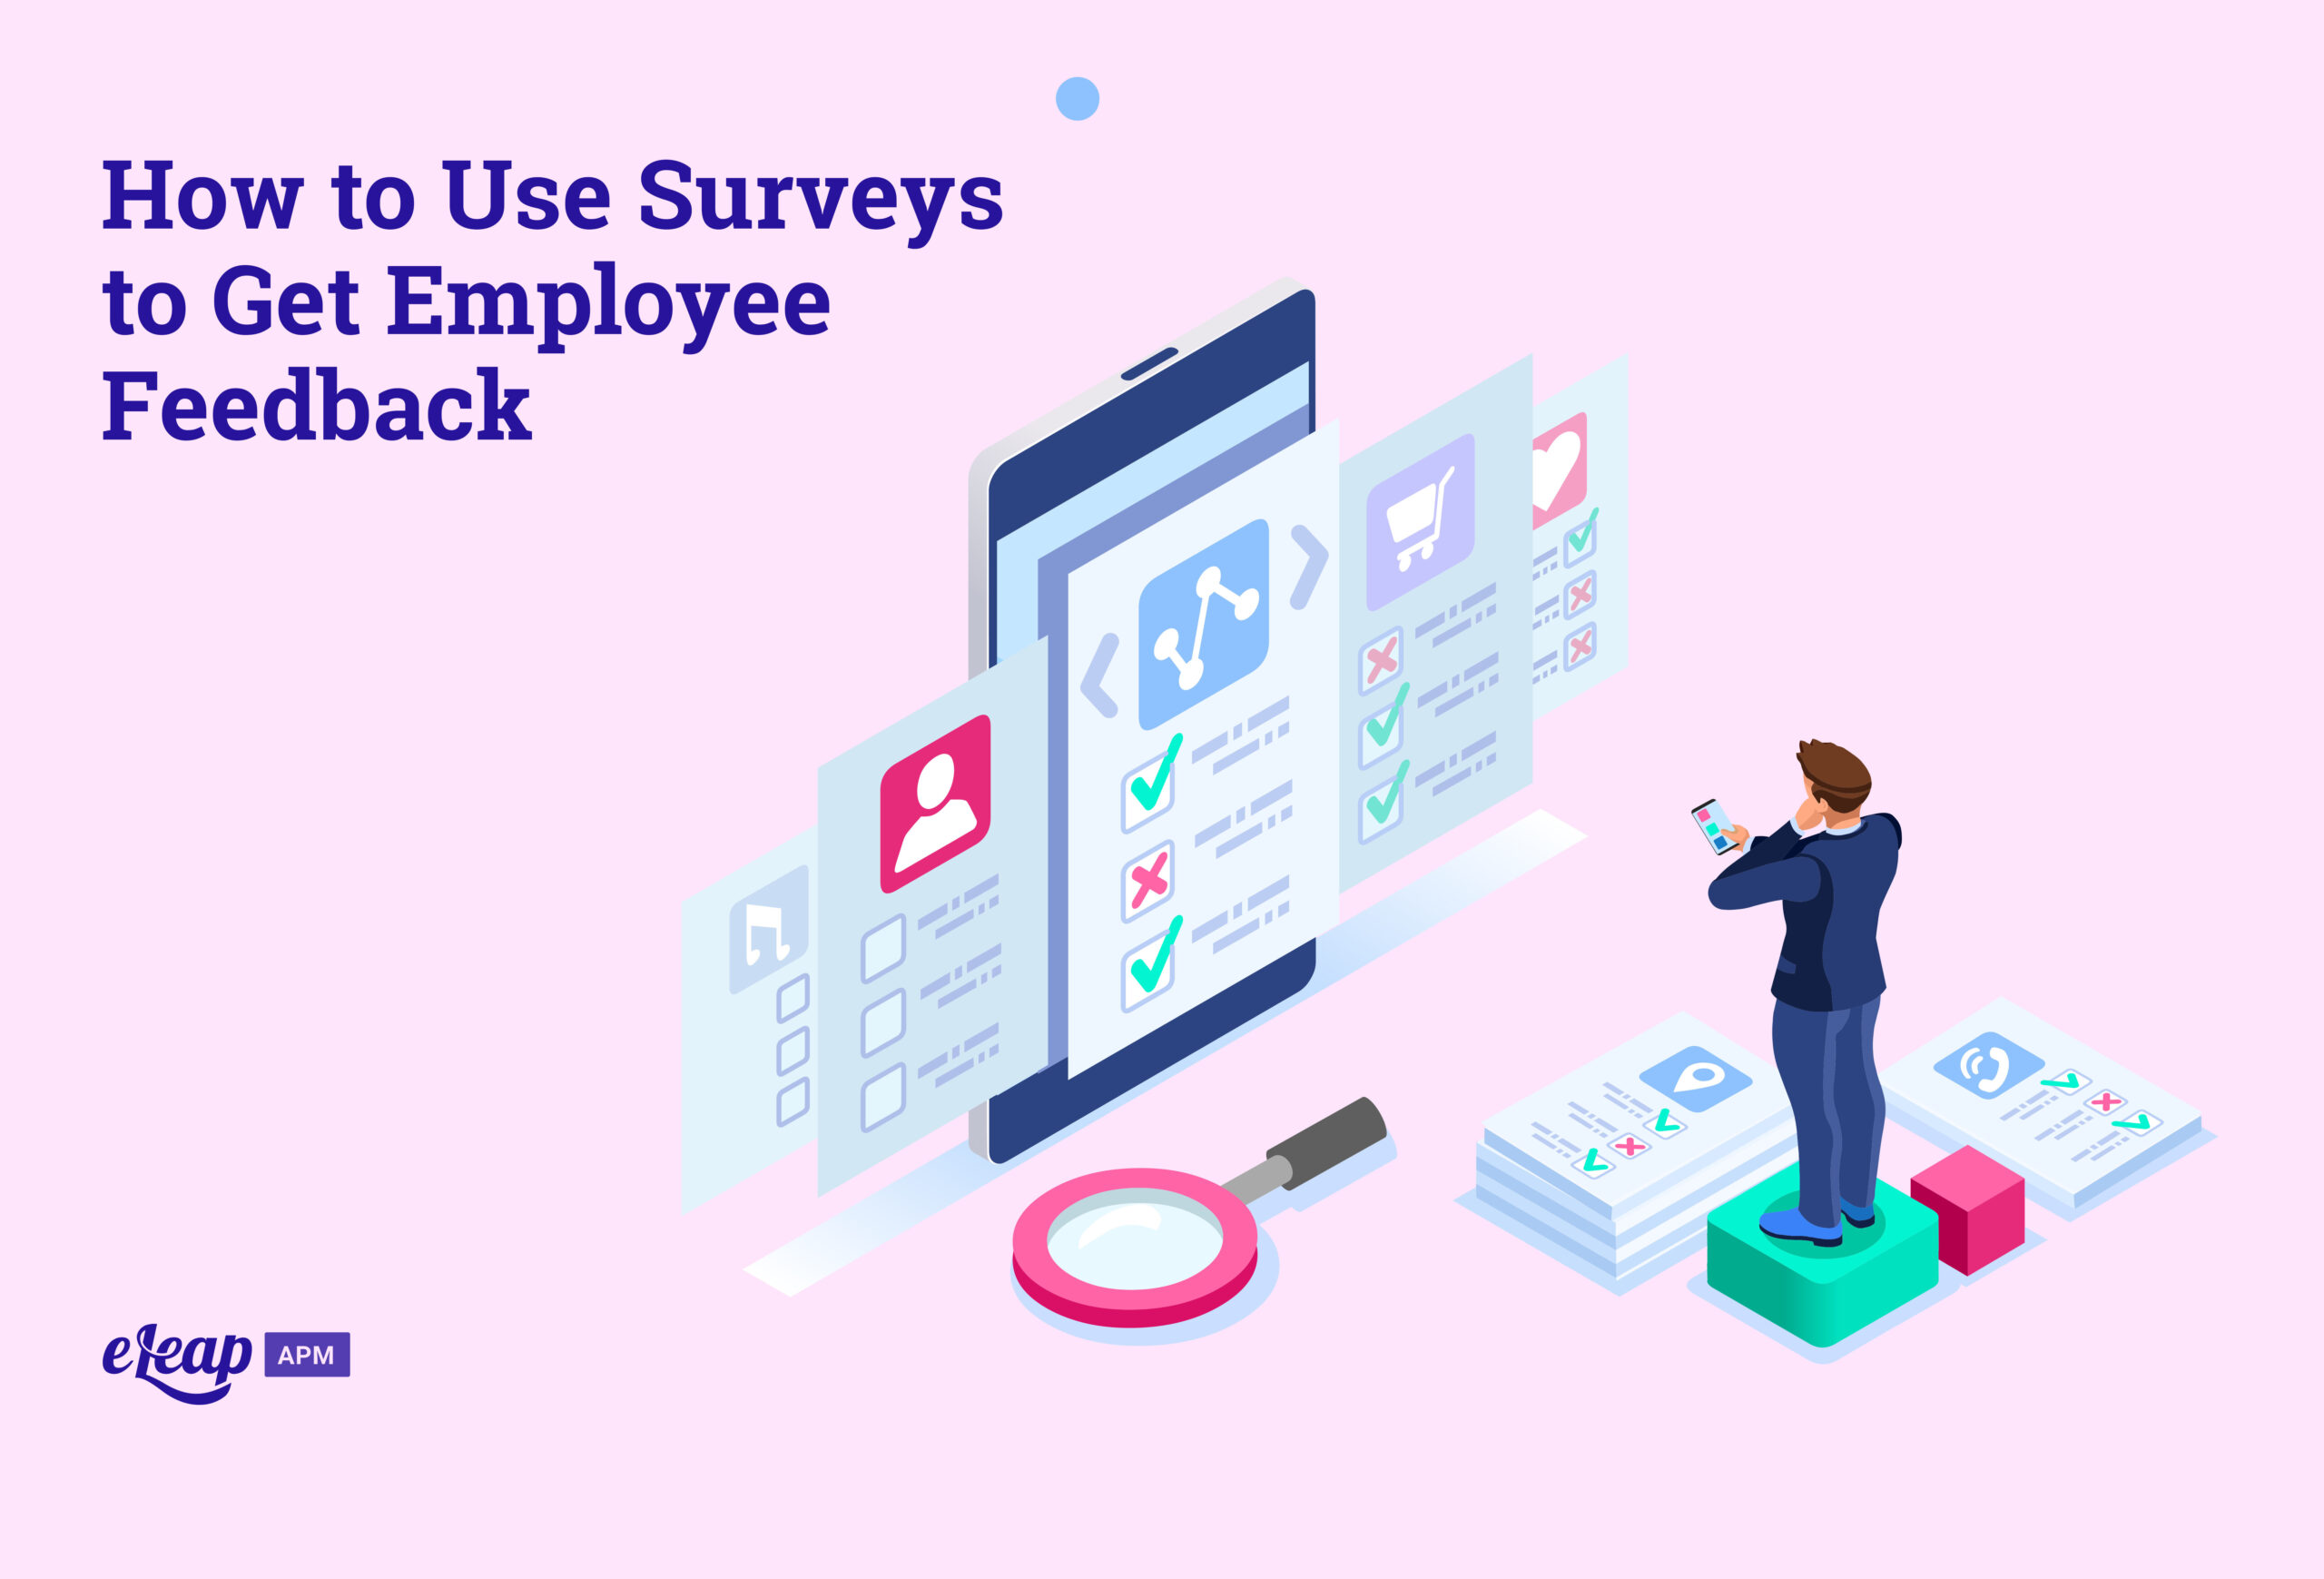 How to Use Surveys to Get Employee Feedback